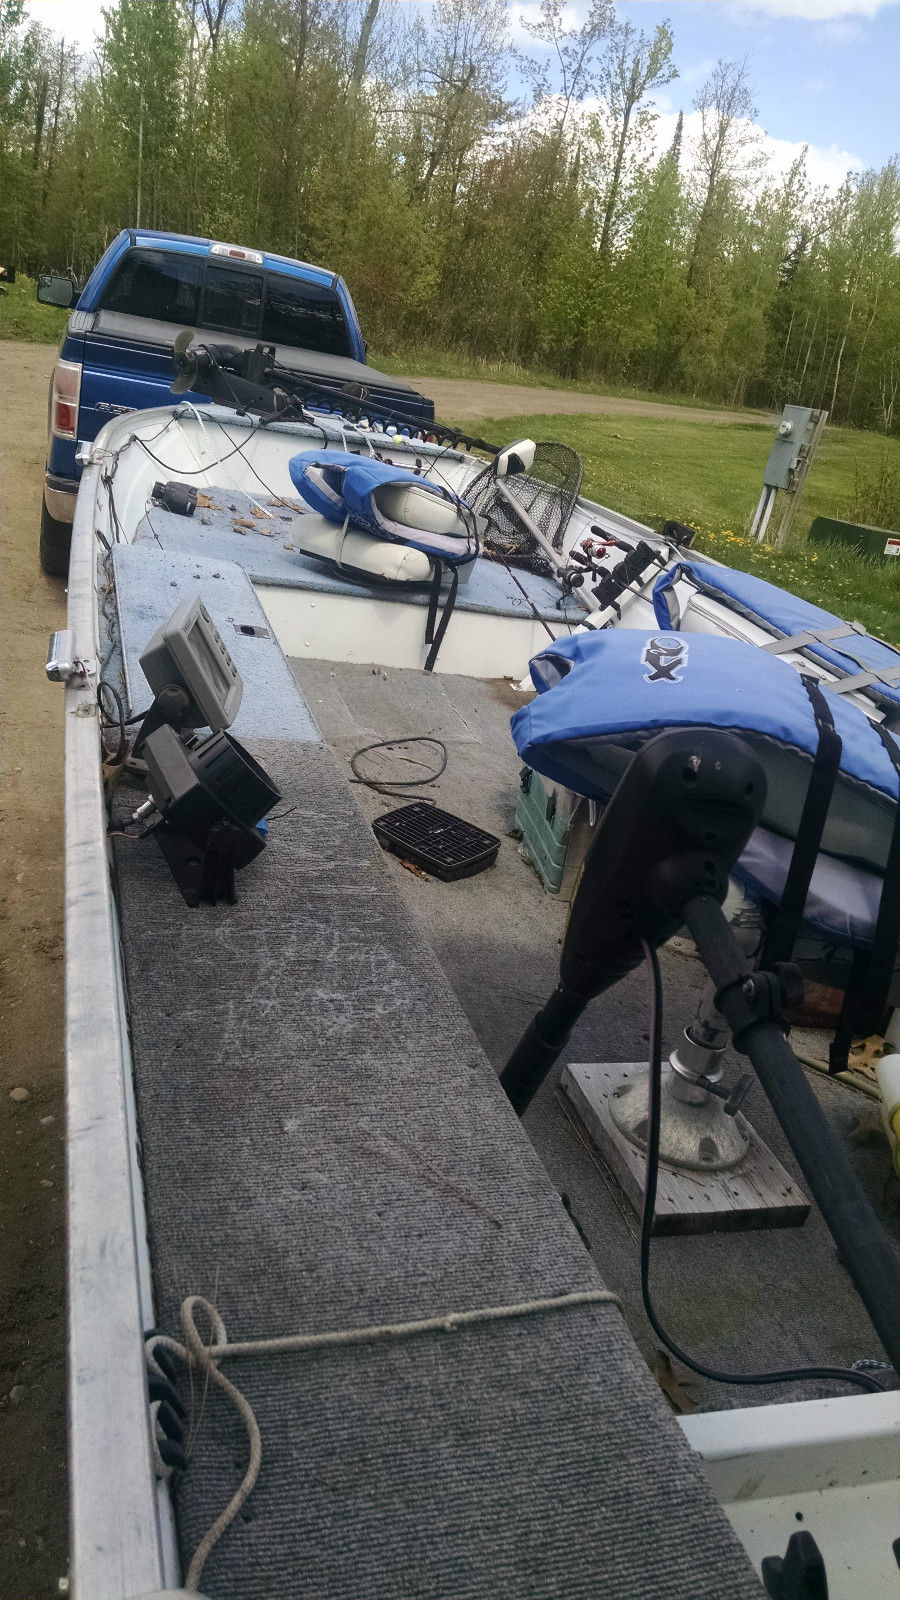 Grumman 16 Ft. Fishing Boat 69 In. Beam 1993 for sale for 